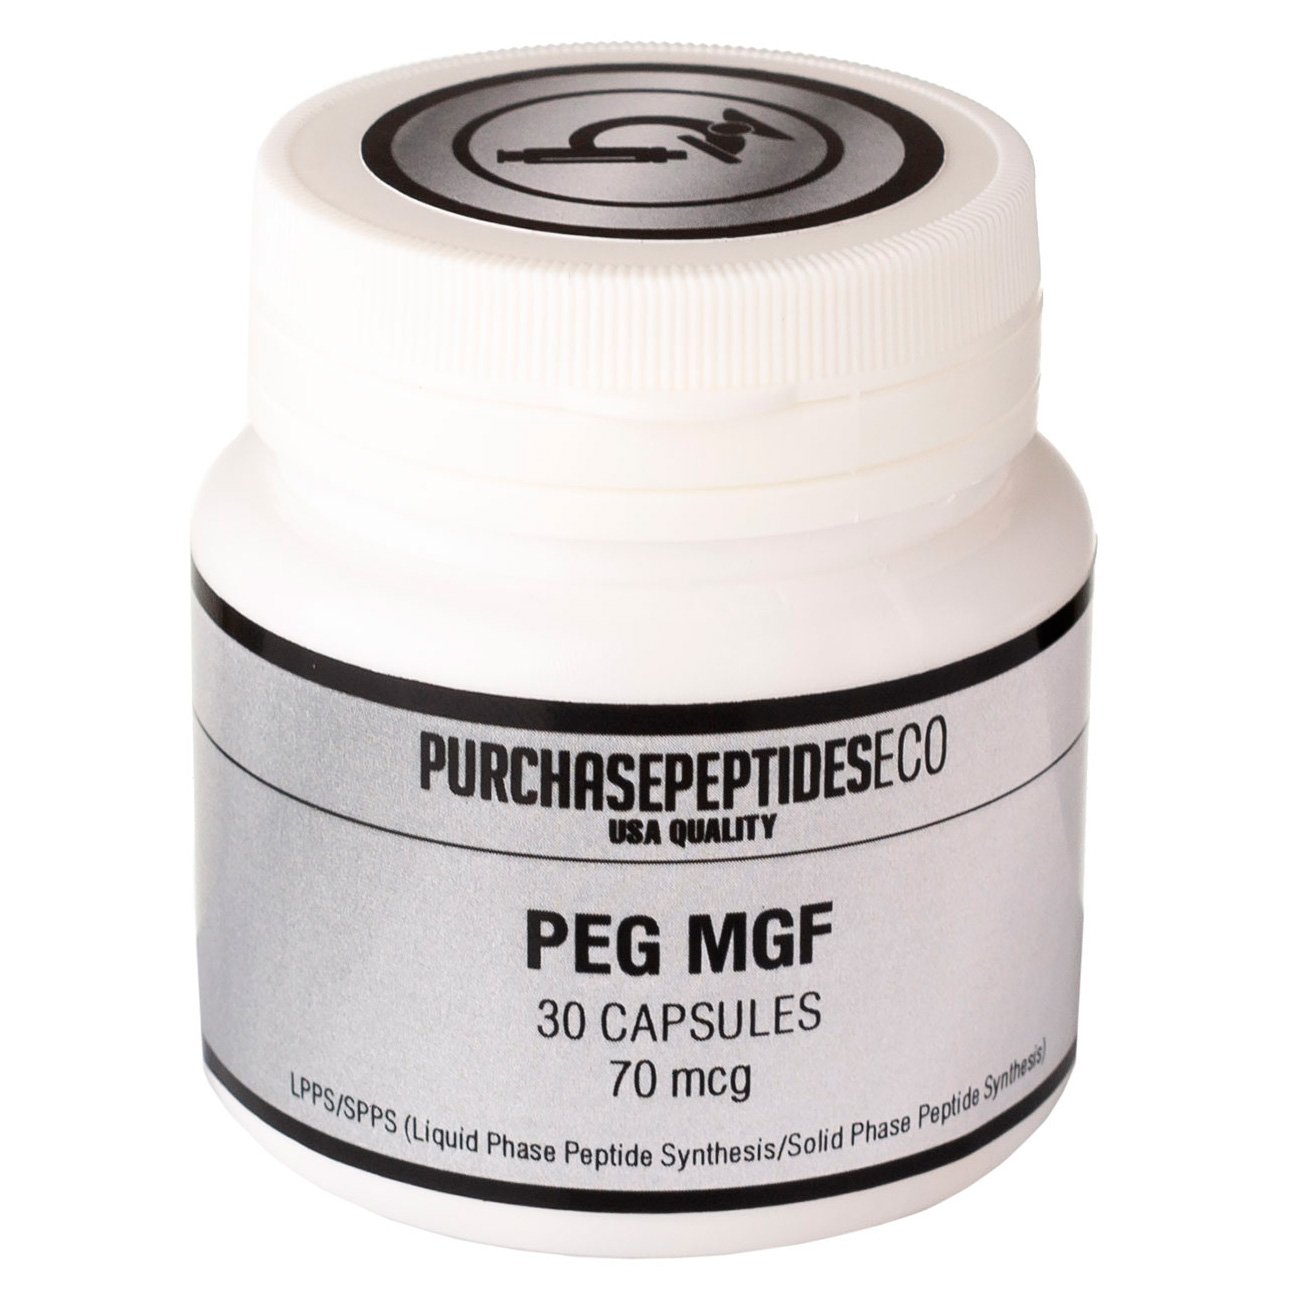 PEG MGF капсулы,  ml, PurchasepeptidesEco. Peptides. 